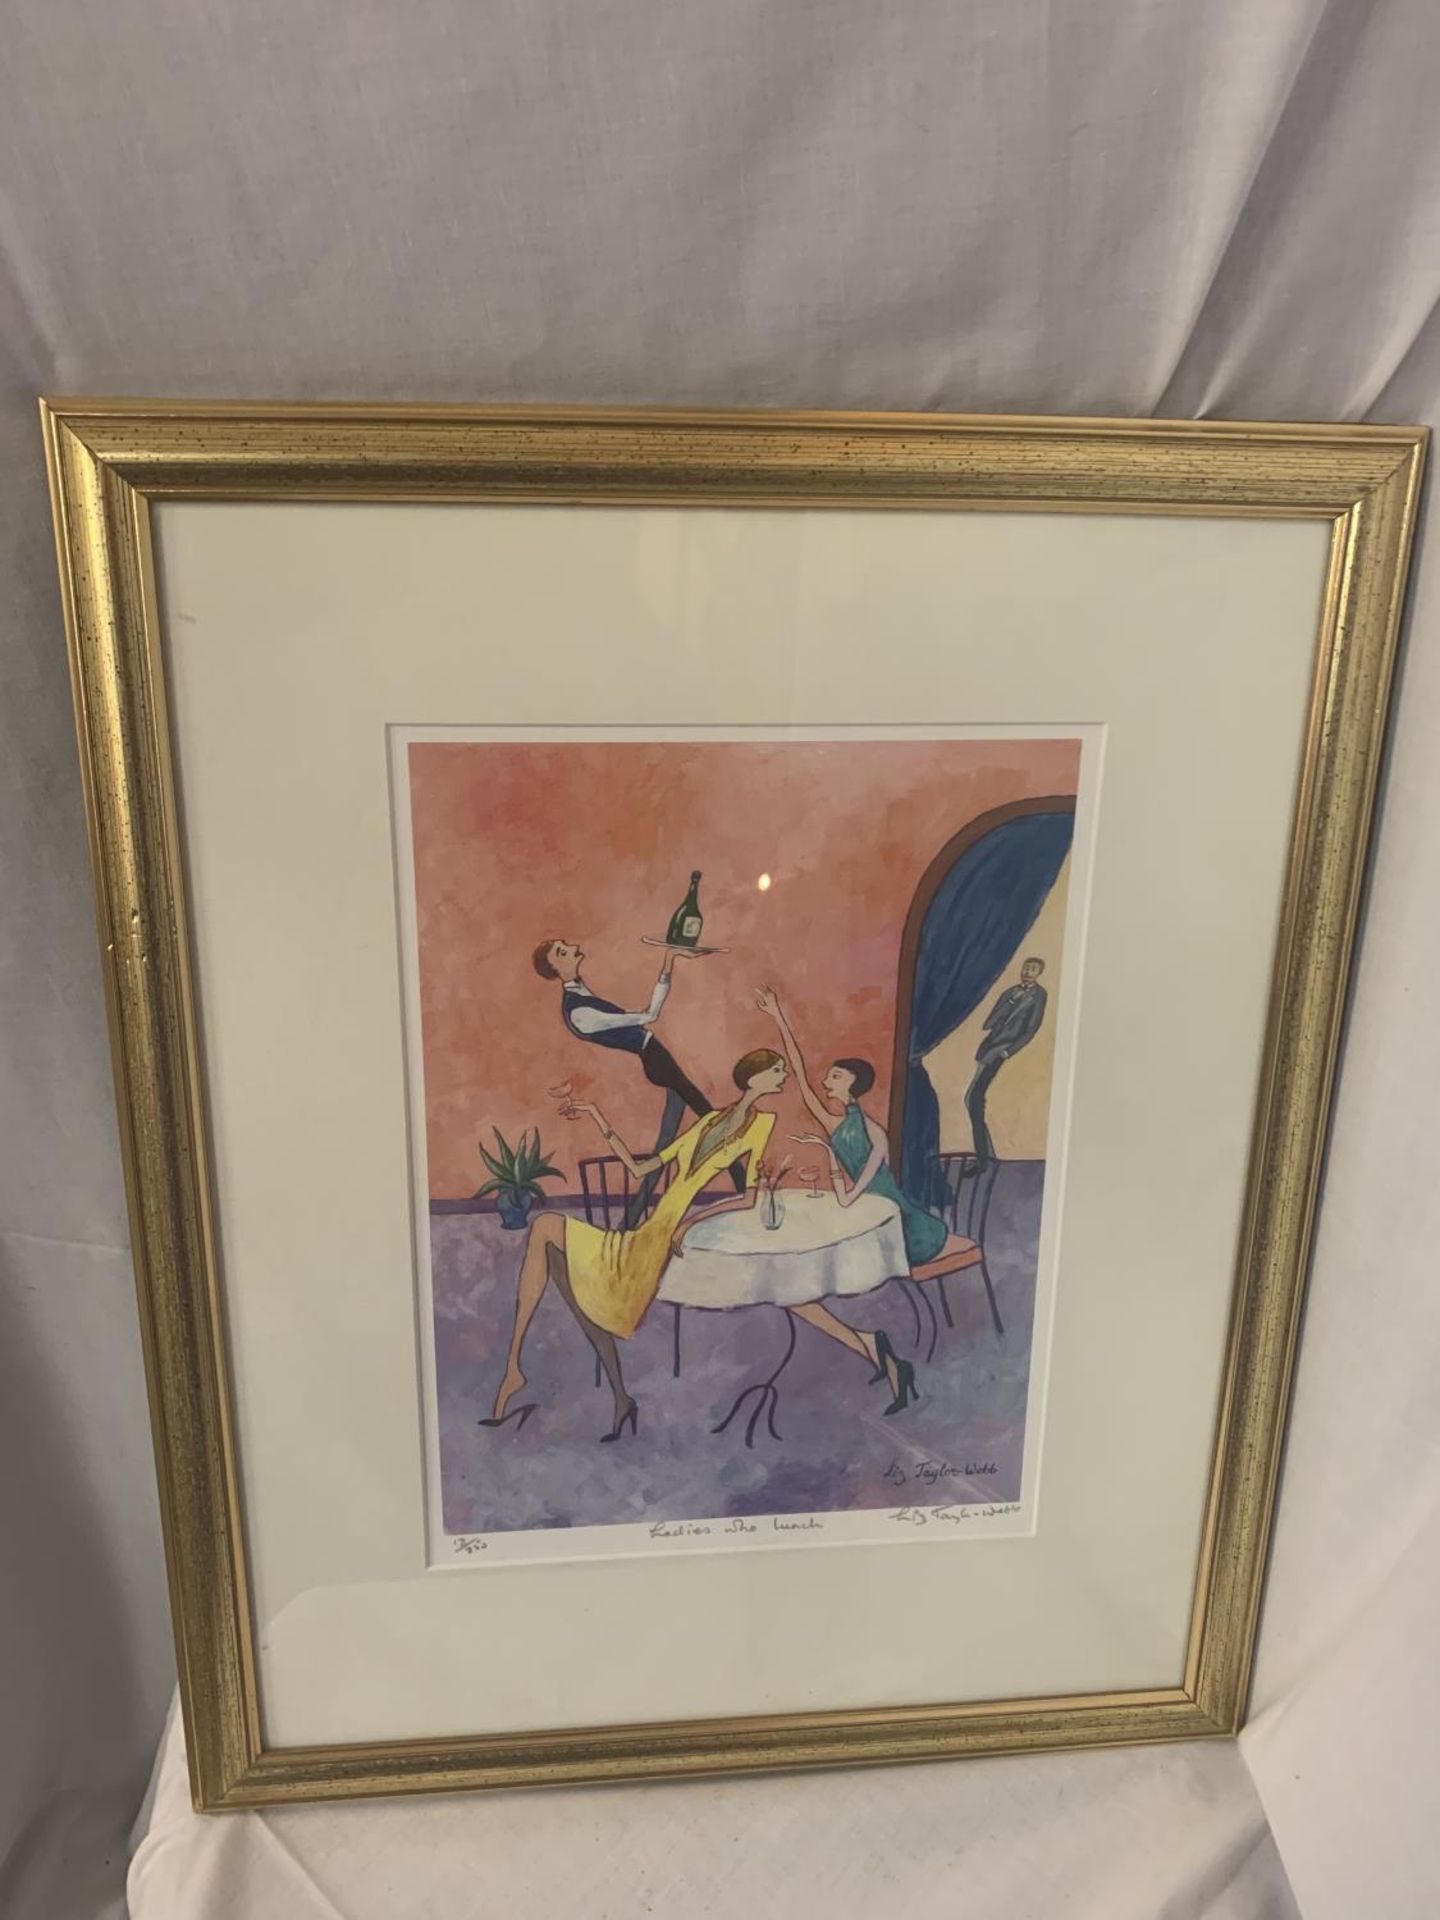 A GILT FRAMED LIMITED EDITION LIZ TAYLOR WEBB PICTURE 'LADIES WHO LUNCH' PENCIL SIGNED TO LOWER